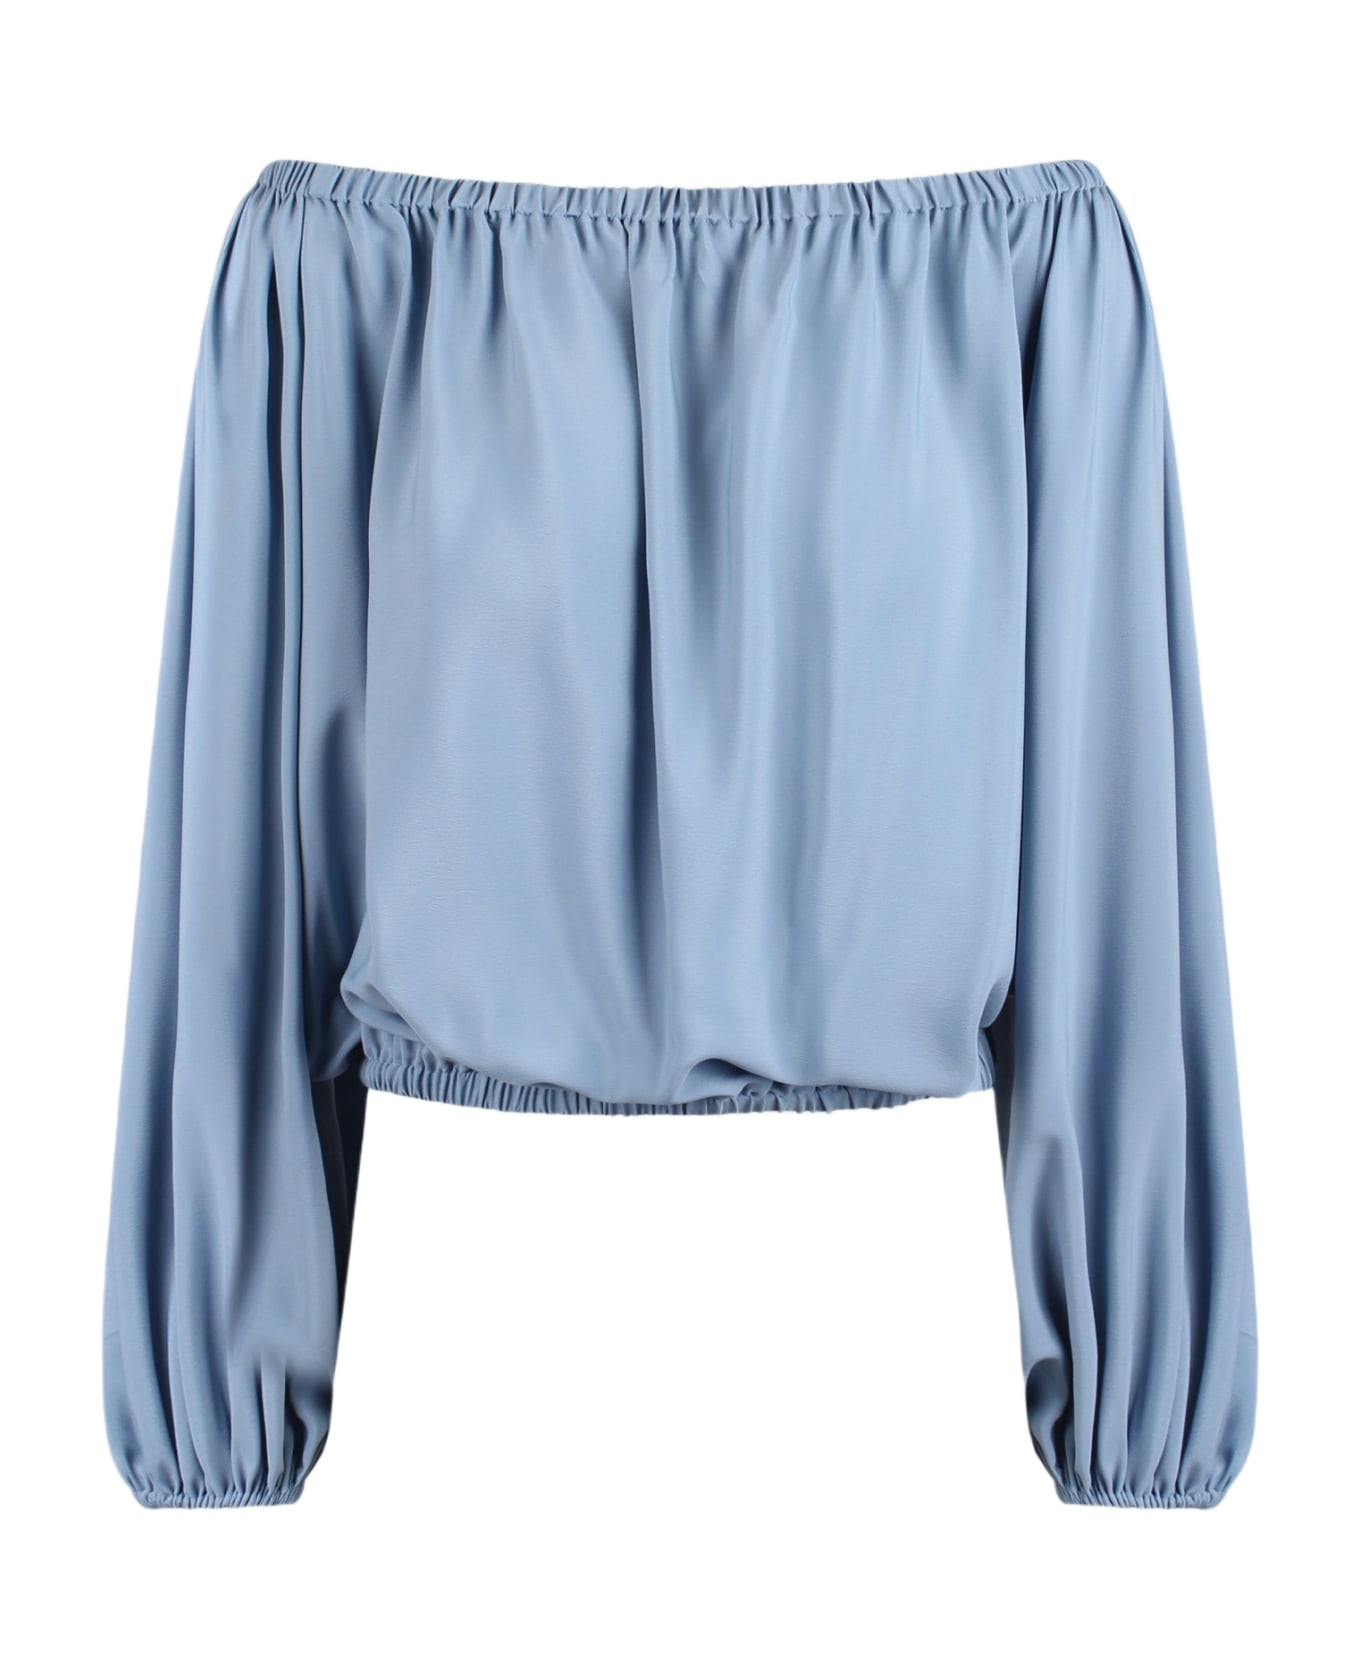 Federica Tosi Blouse With Square Neckline